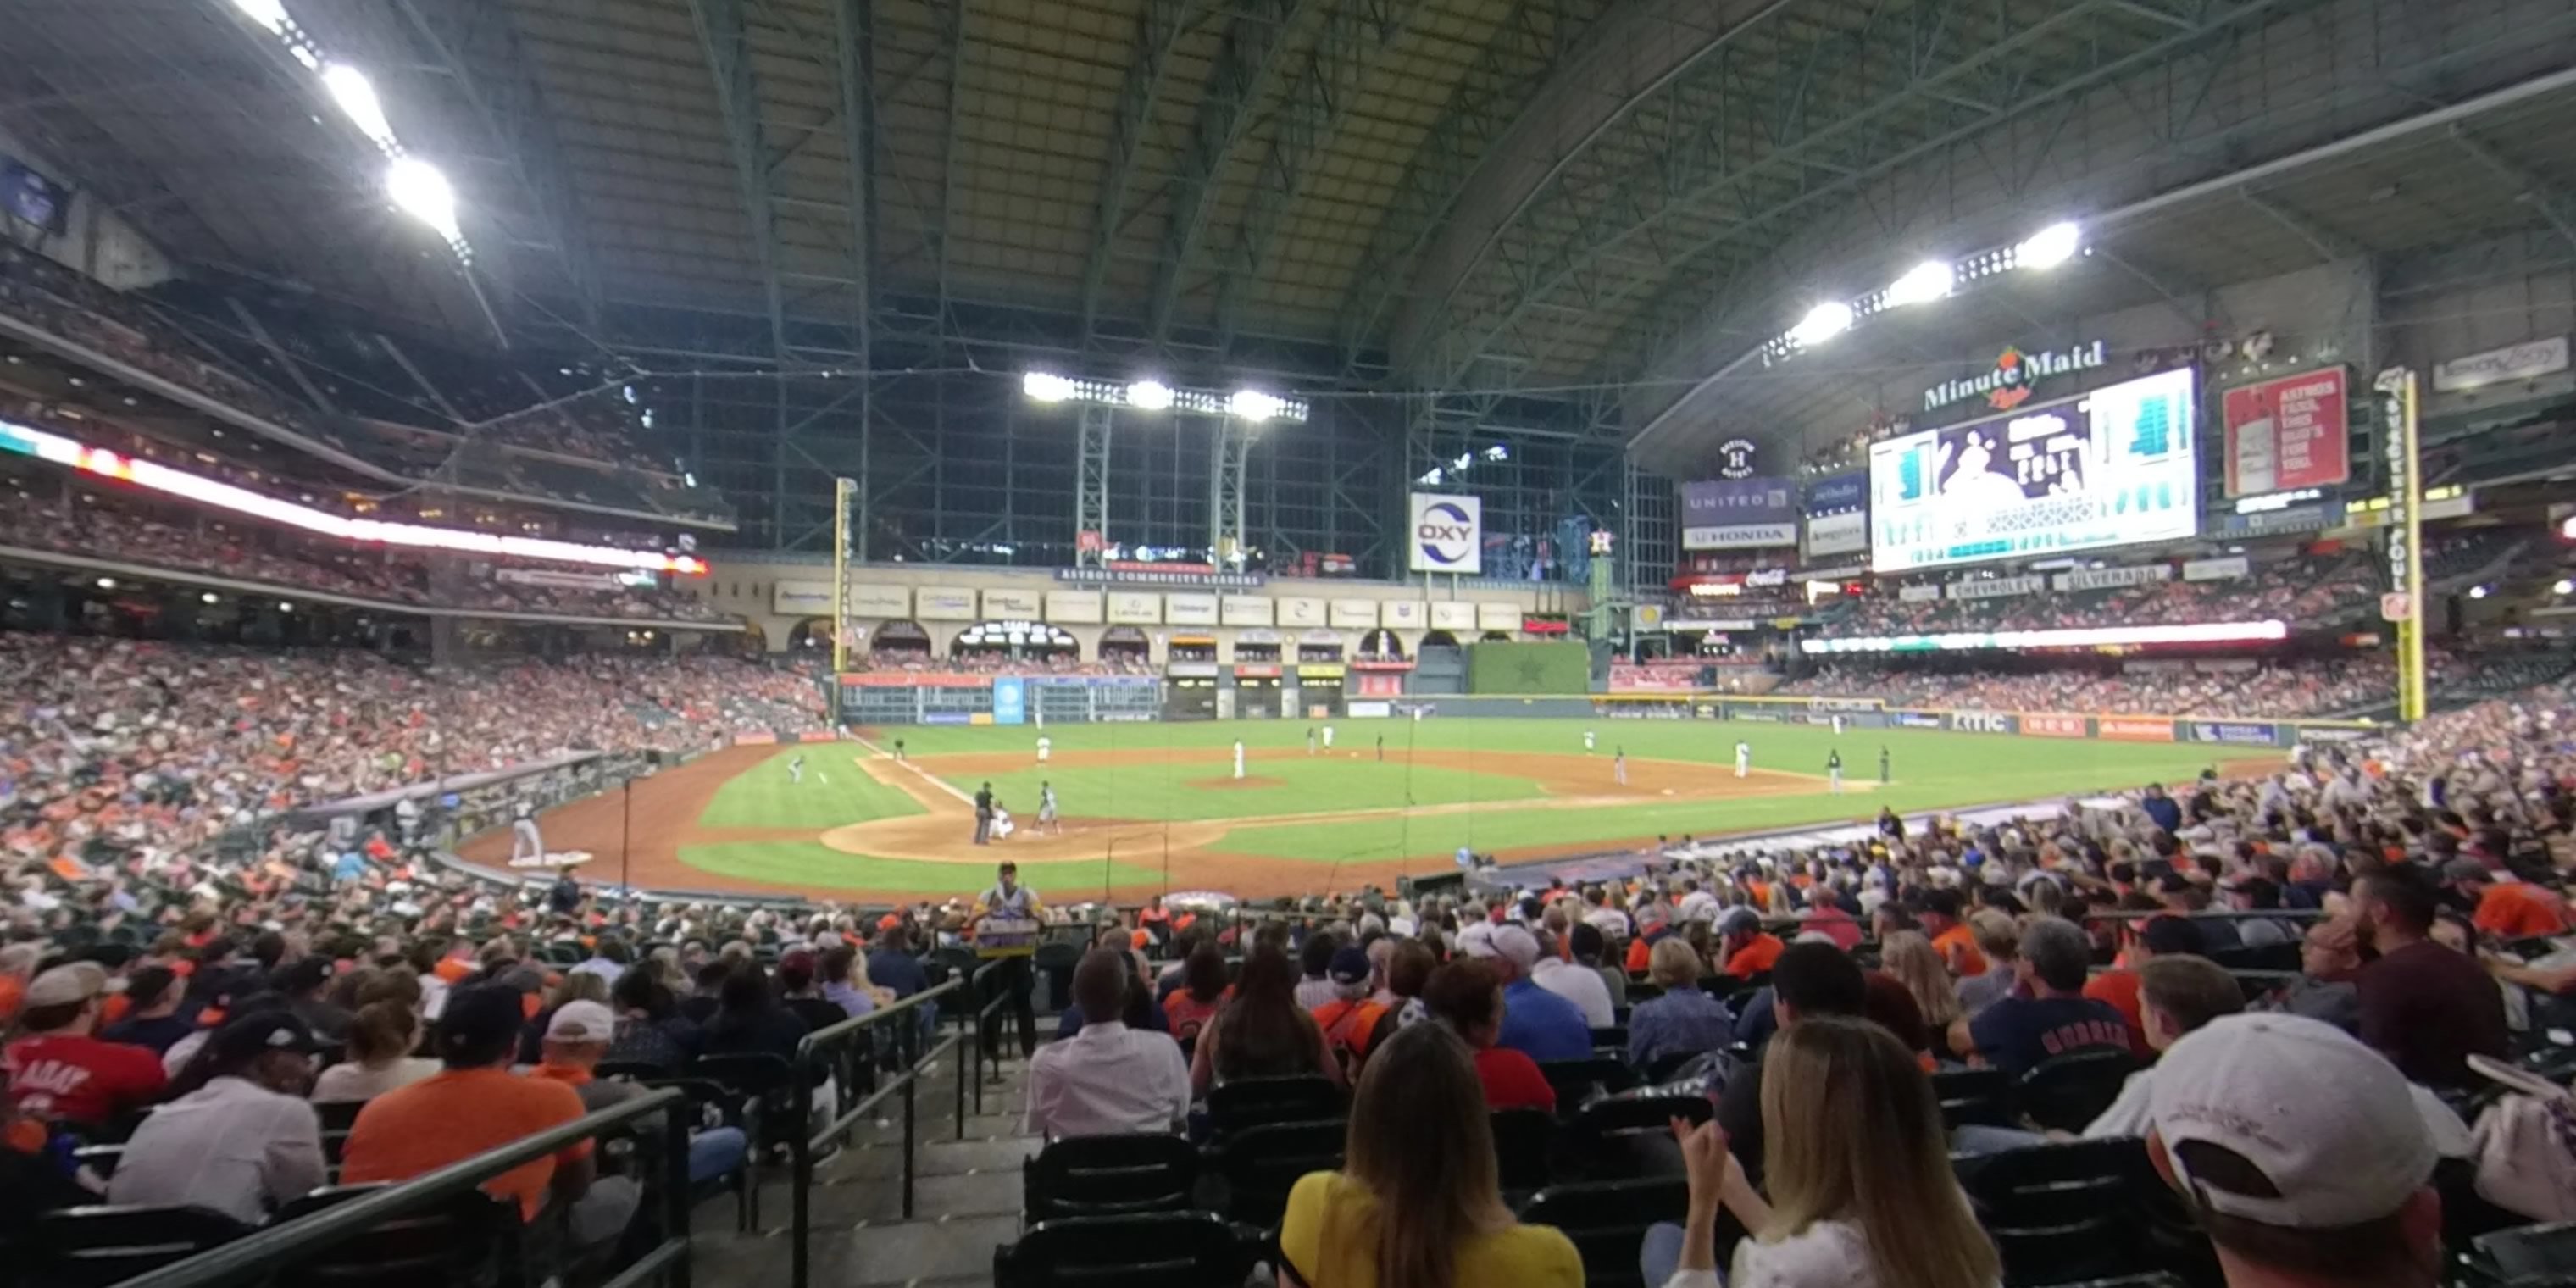 Section 122 At Minute Maid Park